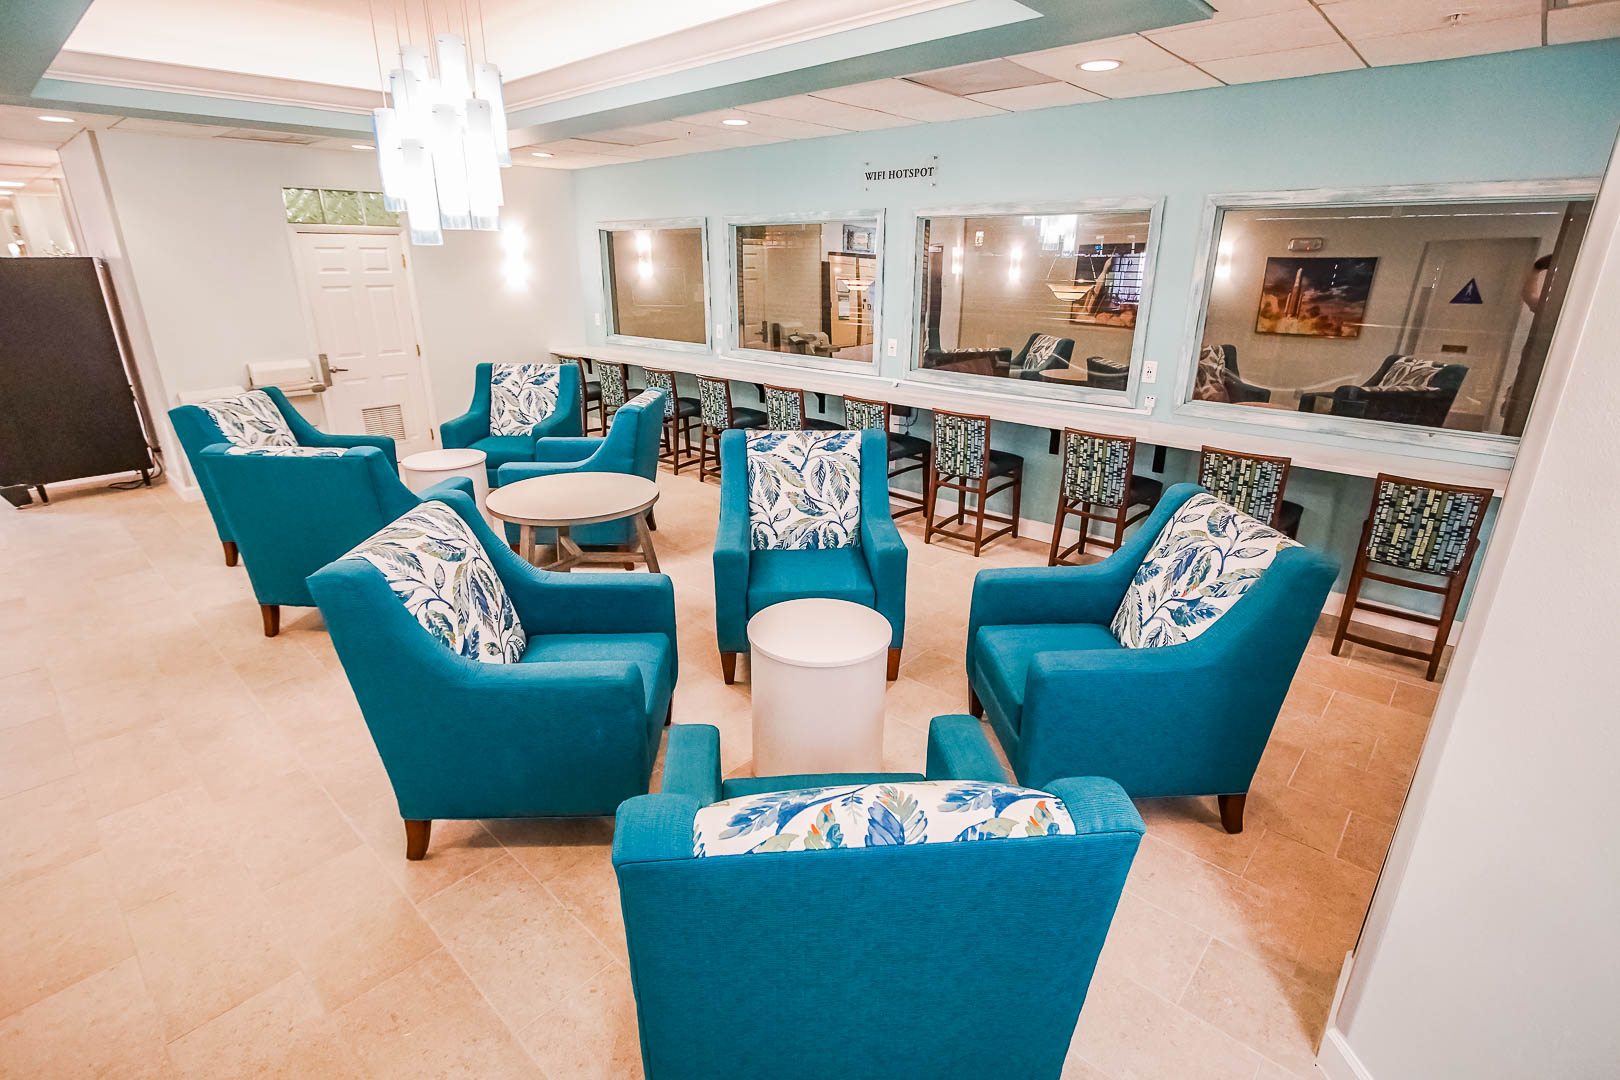 A modern resort lobby area with lounge at VRI's The Resort on Cocoa Beach in Florida.